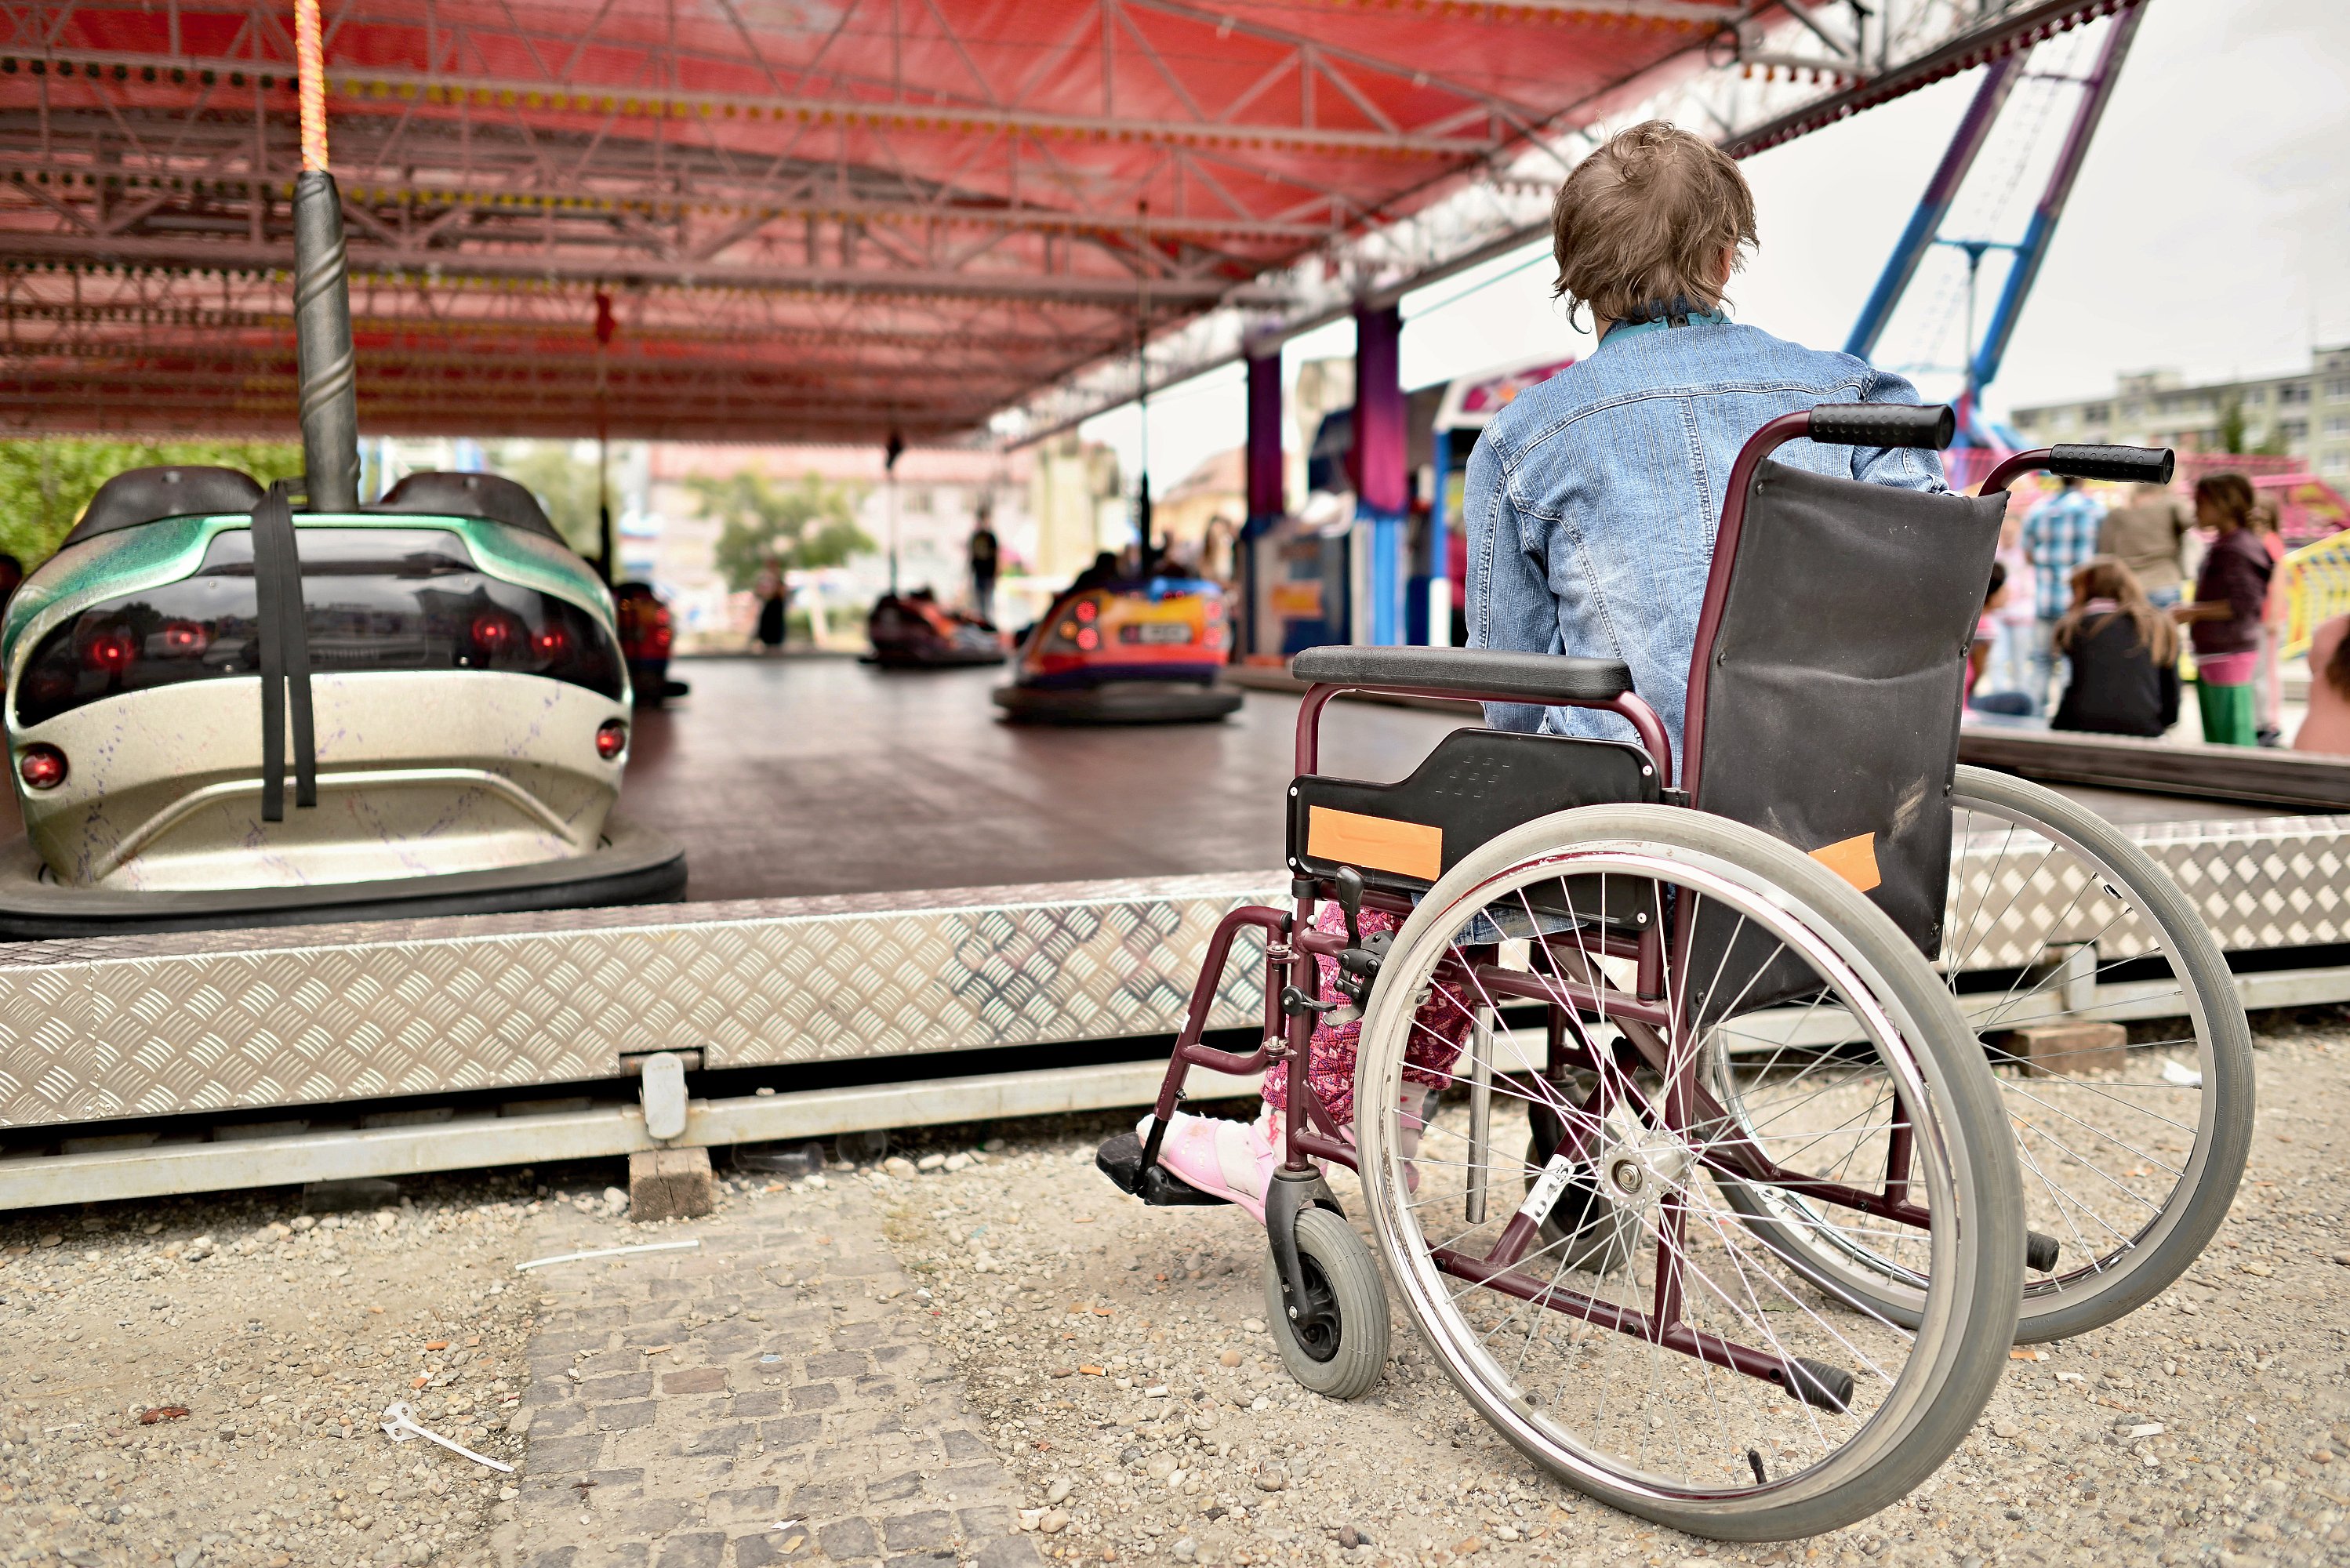 Woman faces away from camera in a wheelchair looking at bumper car ride.